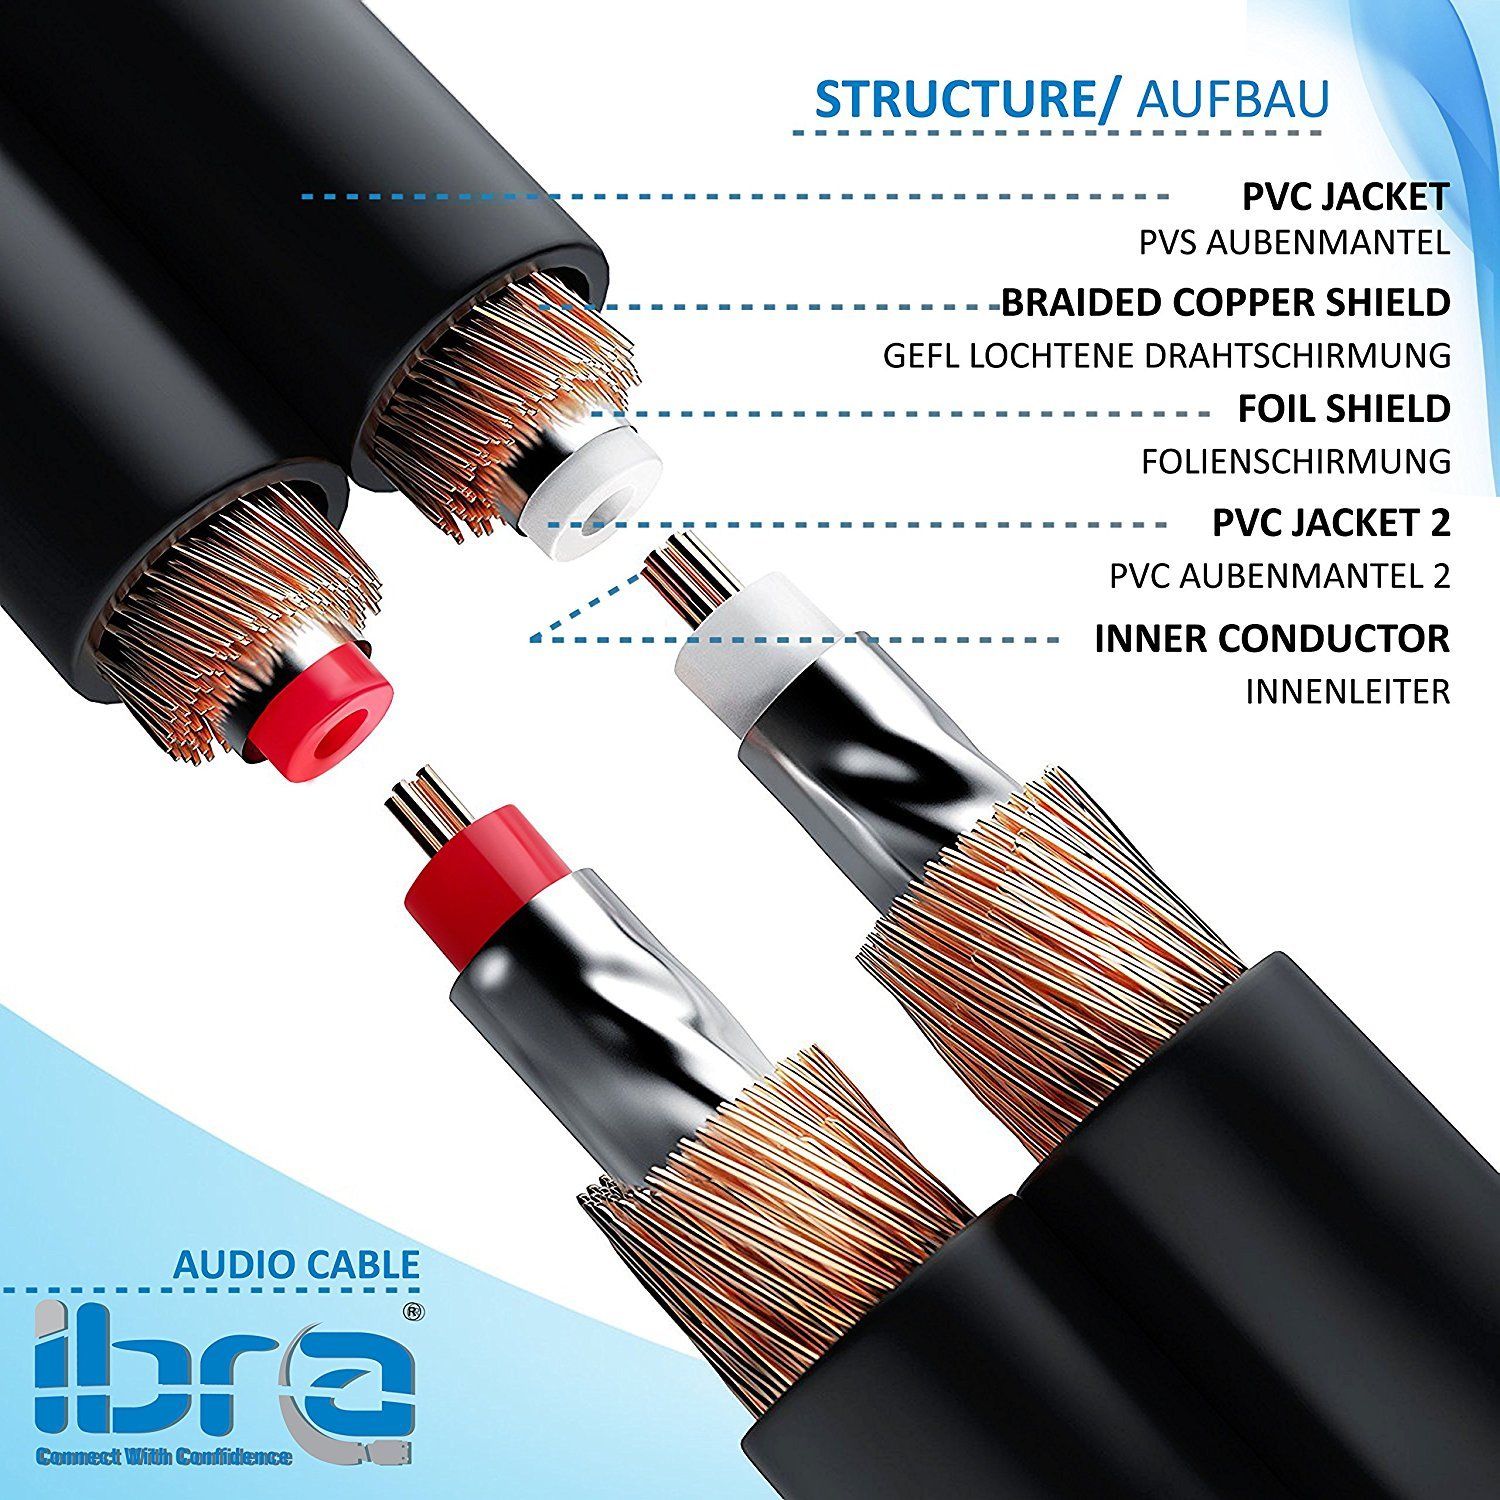 IBRA 5M 2RCA Male to 2RCA Male High Quality Home Theater Audio Cable -2RCA TO 2RCA Cable - Gun Metal Range